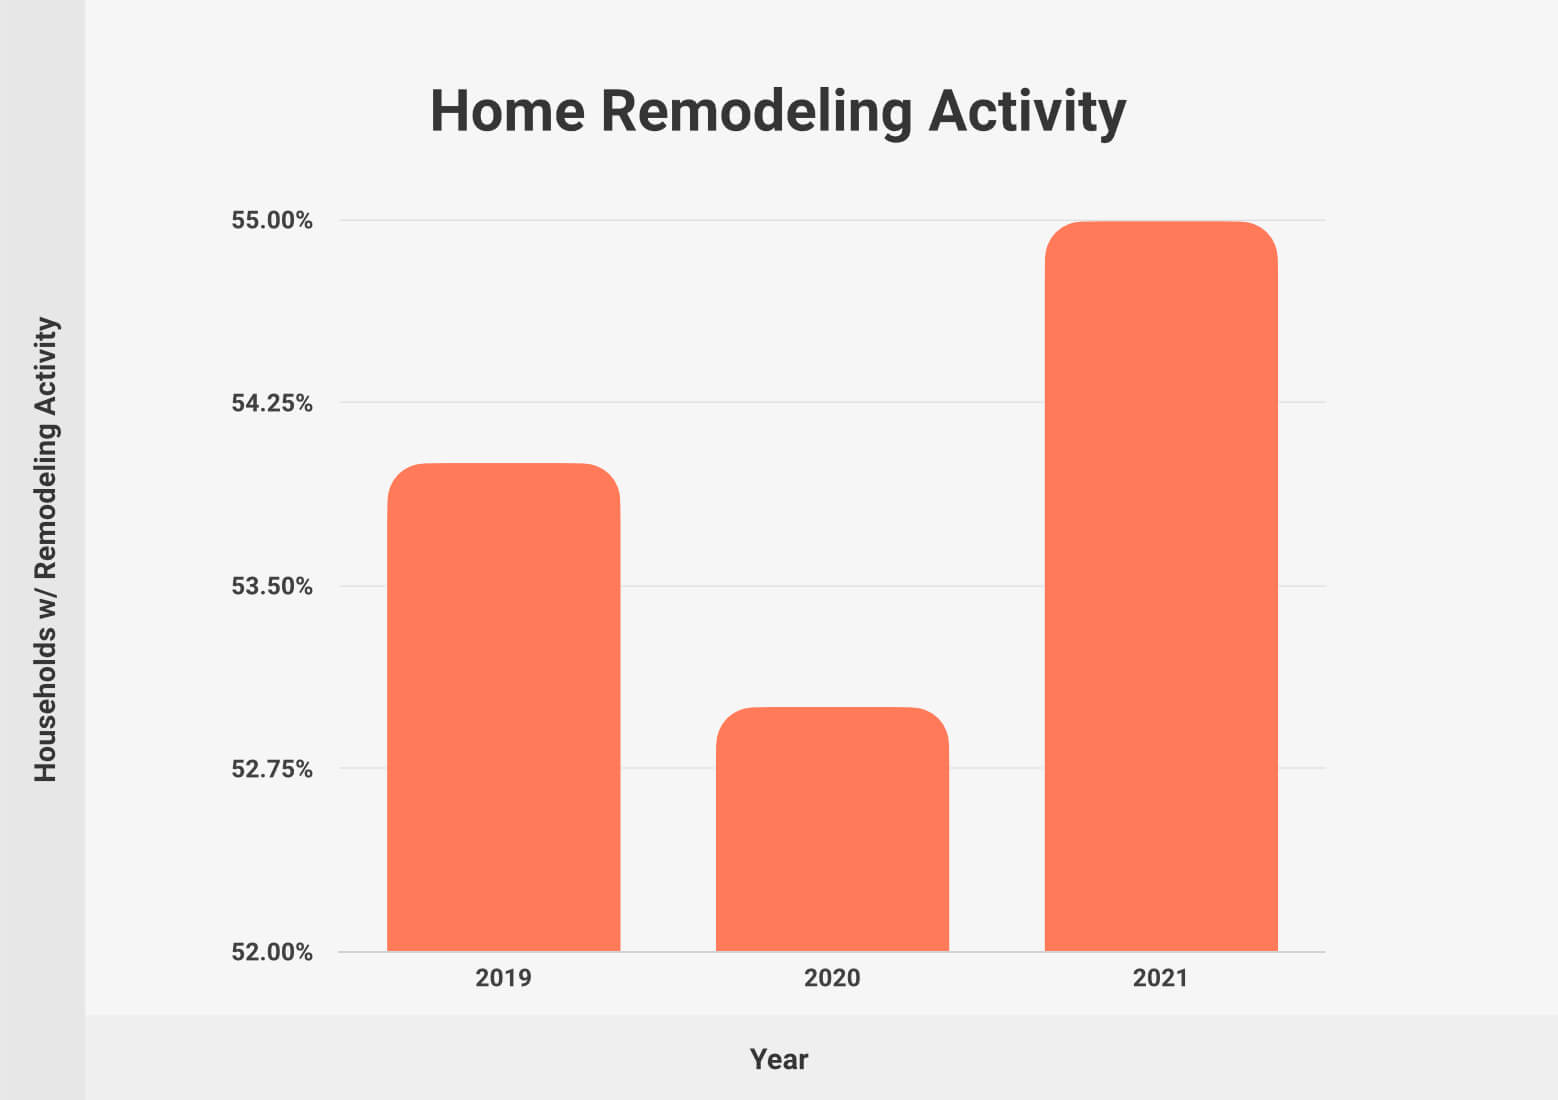 Home Remodeling Activity